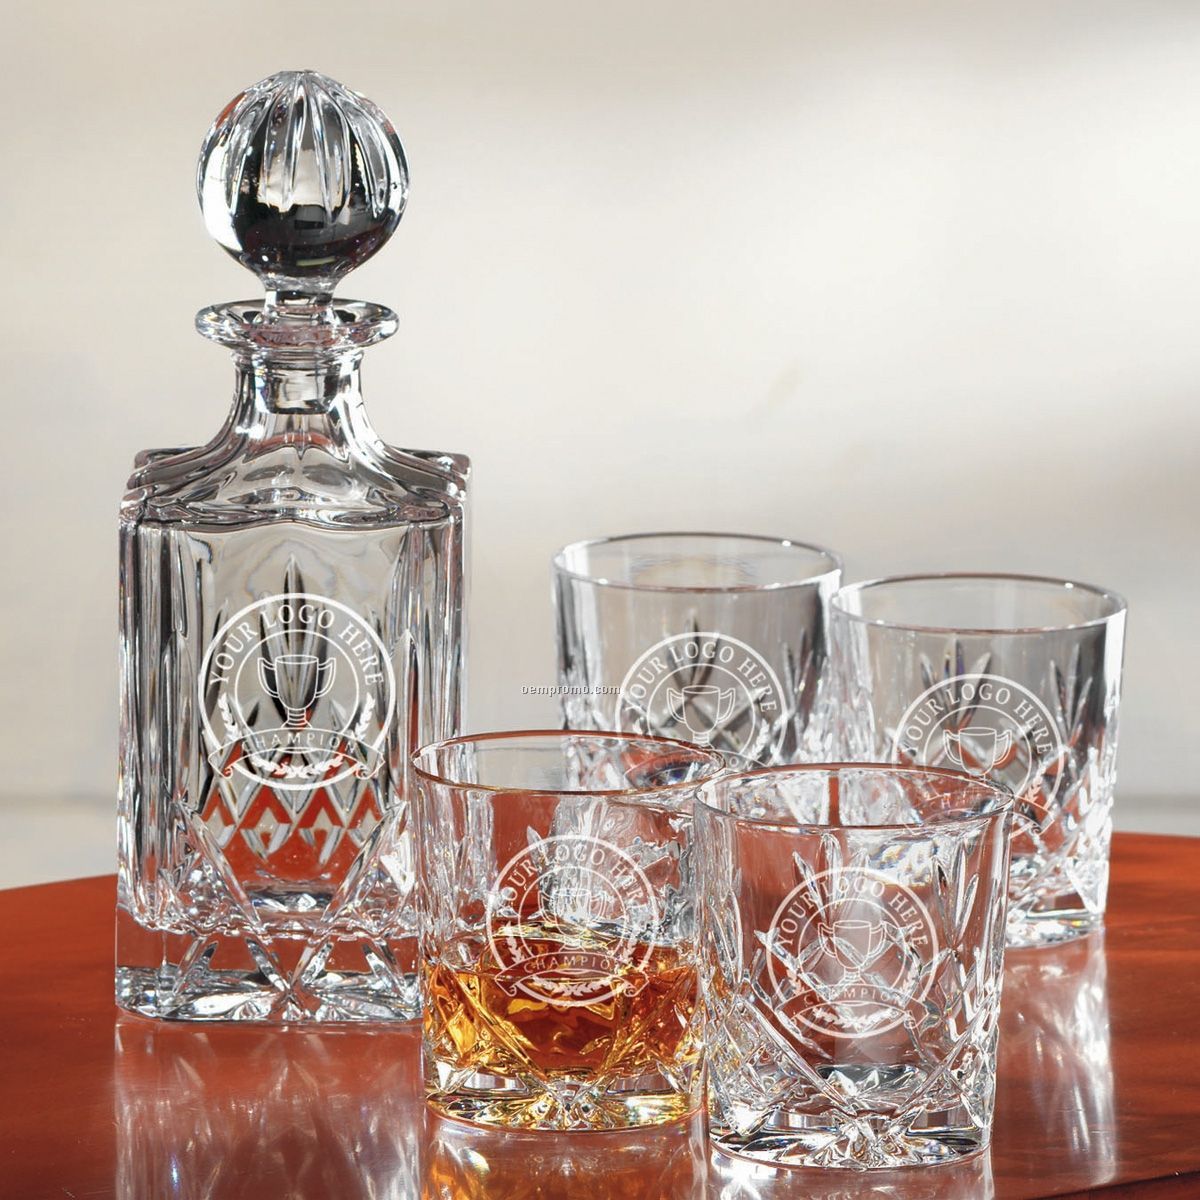 5 Piece Director's Whiskey Set - 1 Decanter & 4 Glasses